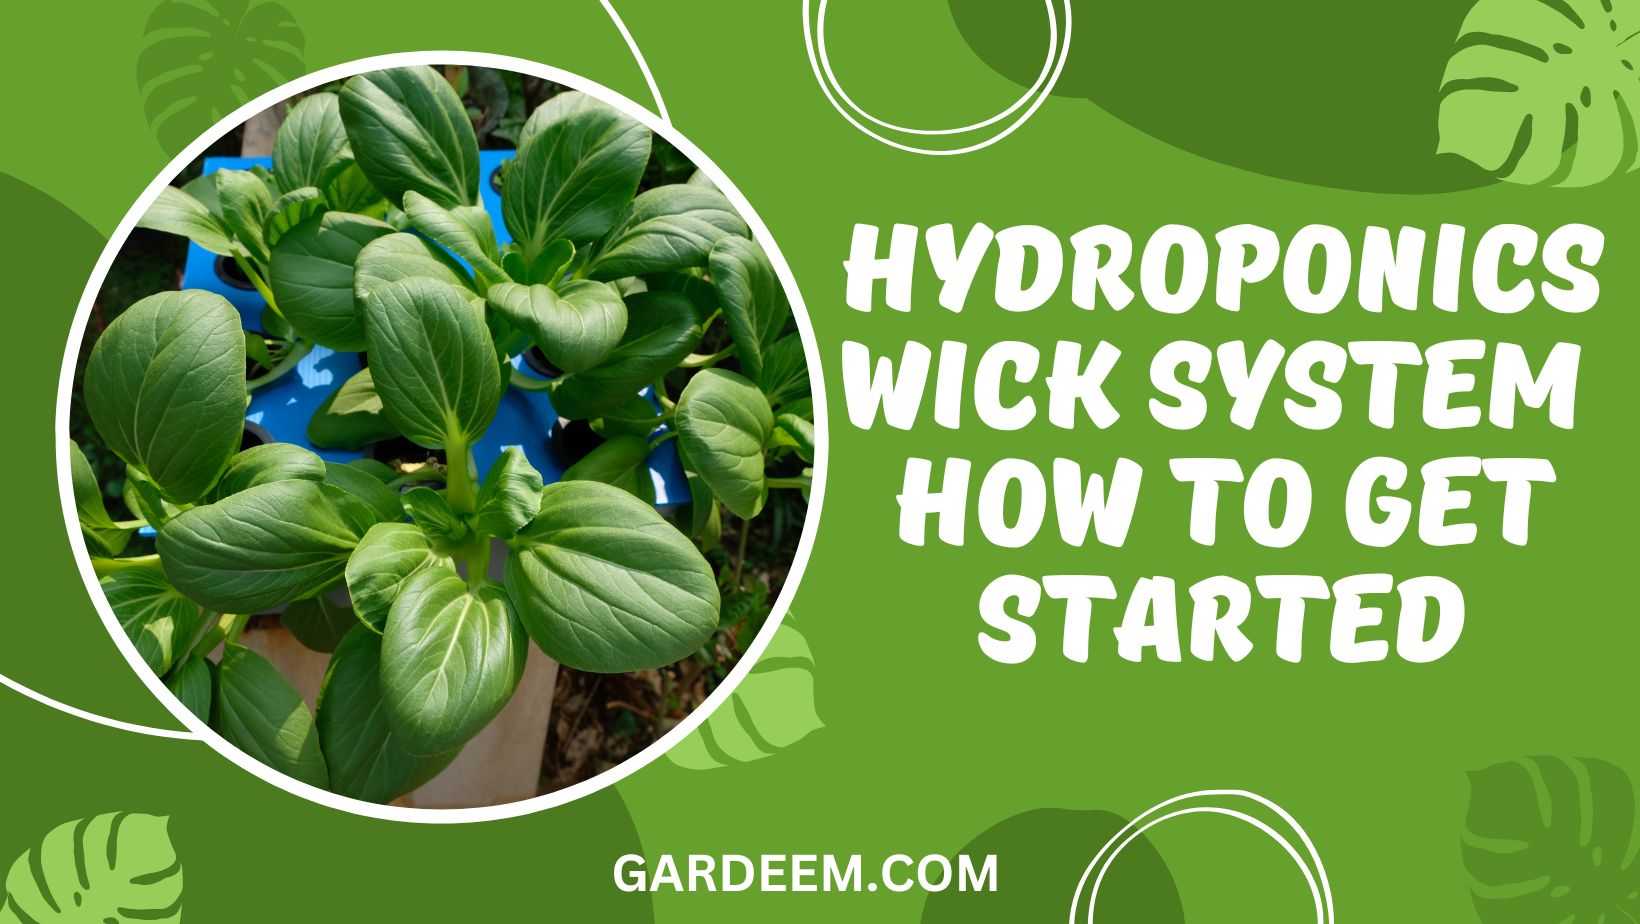 Hydroponics Wick System - How To Get Started